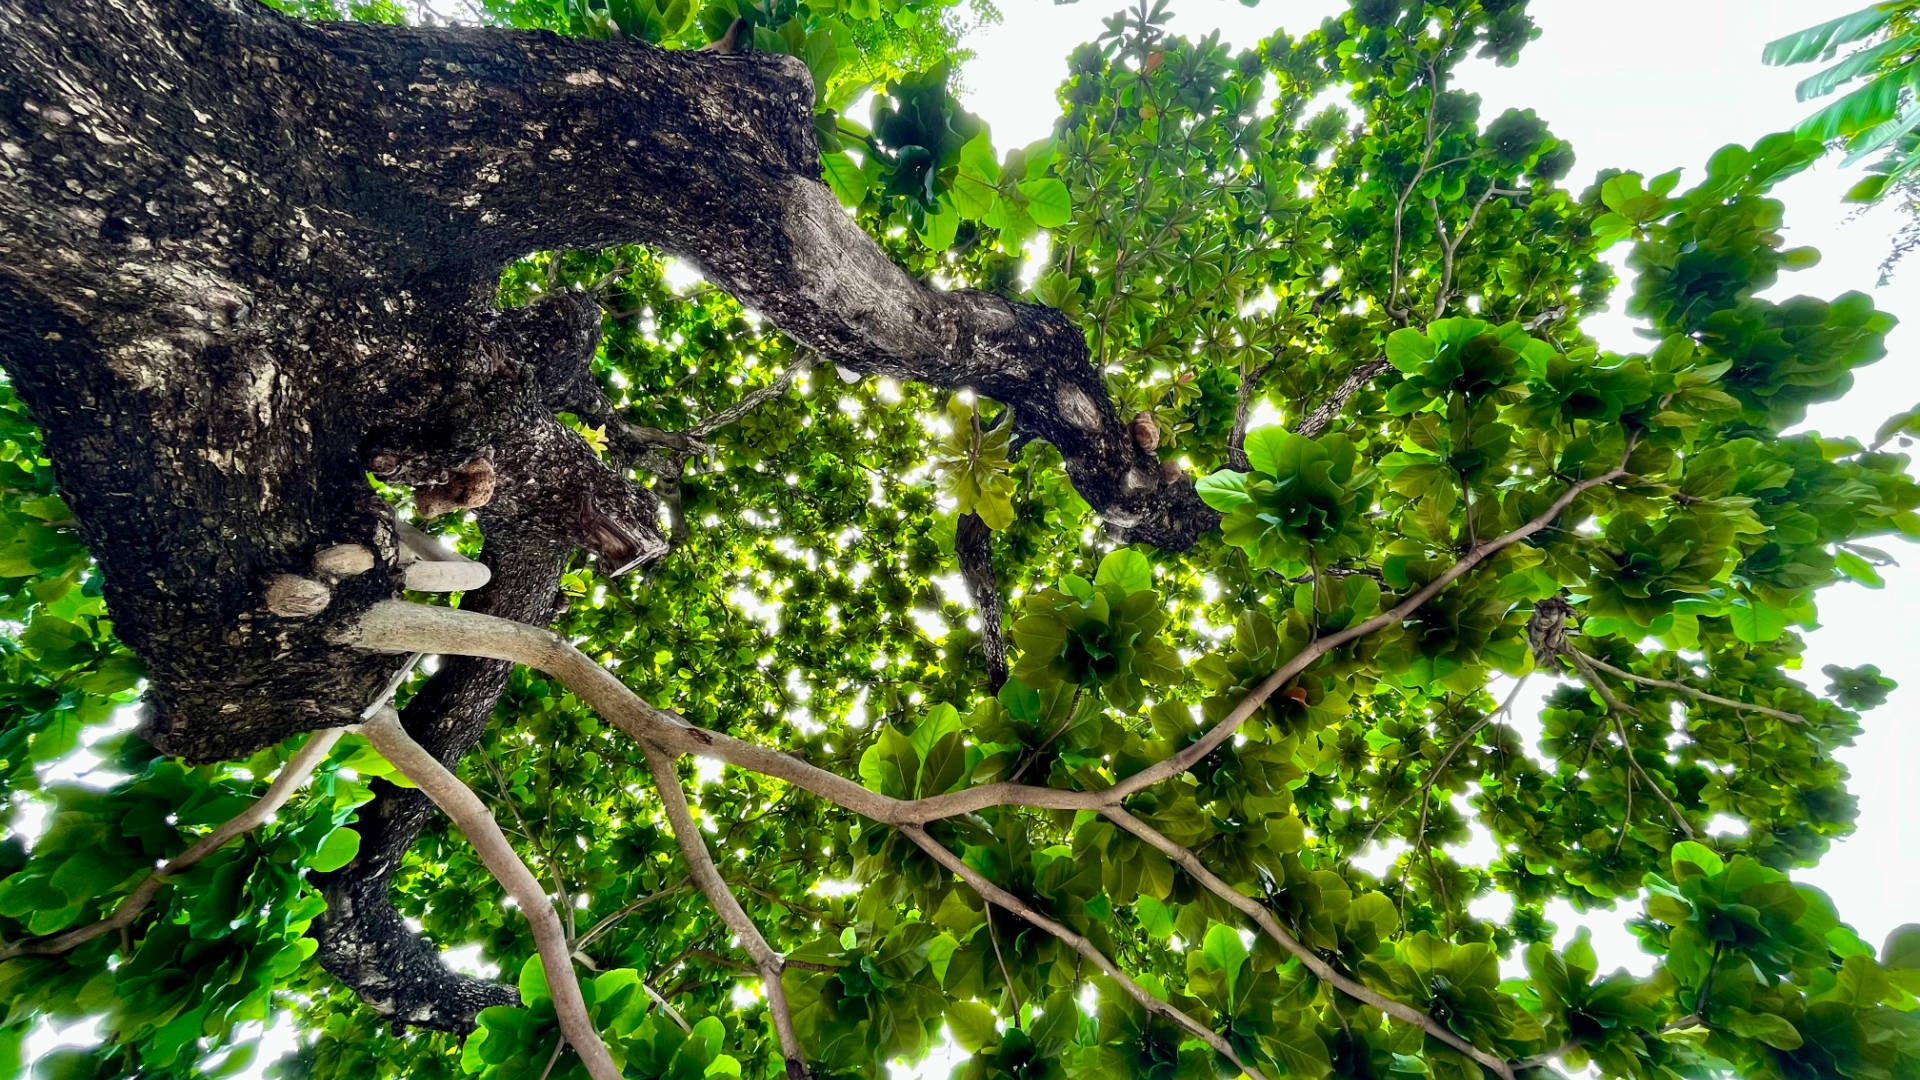 A large green tree, viewed from below.